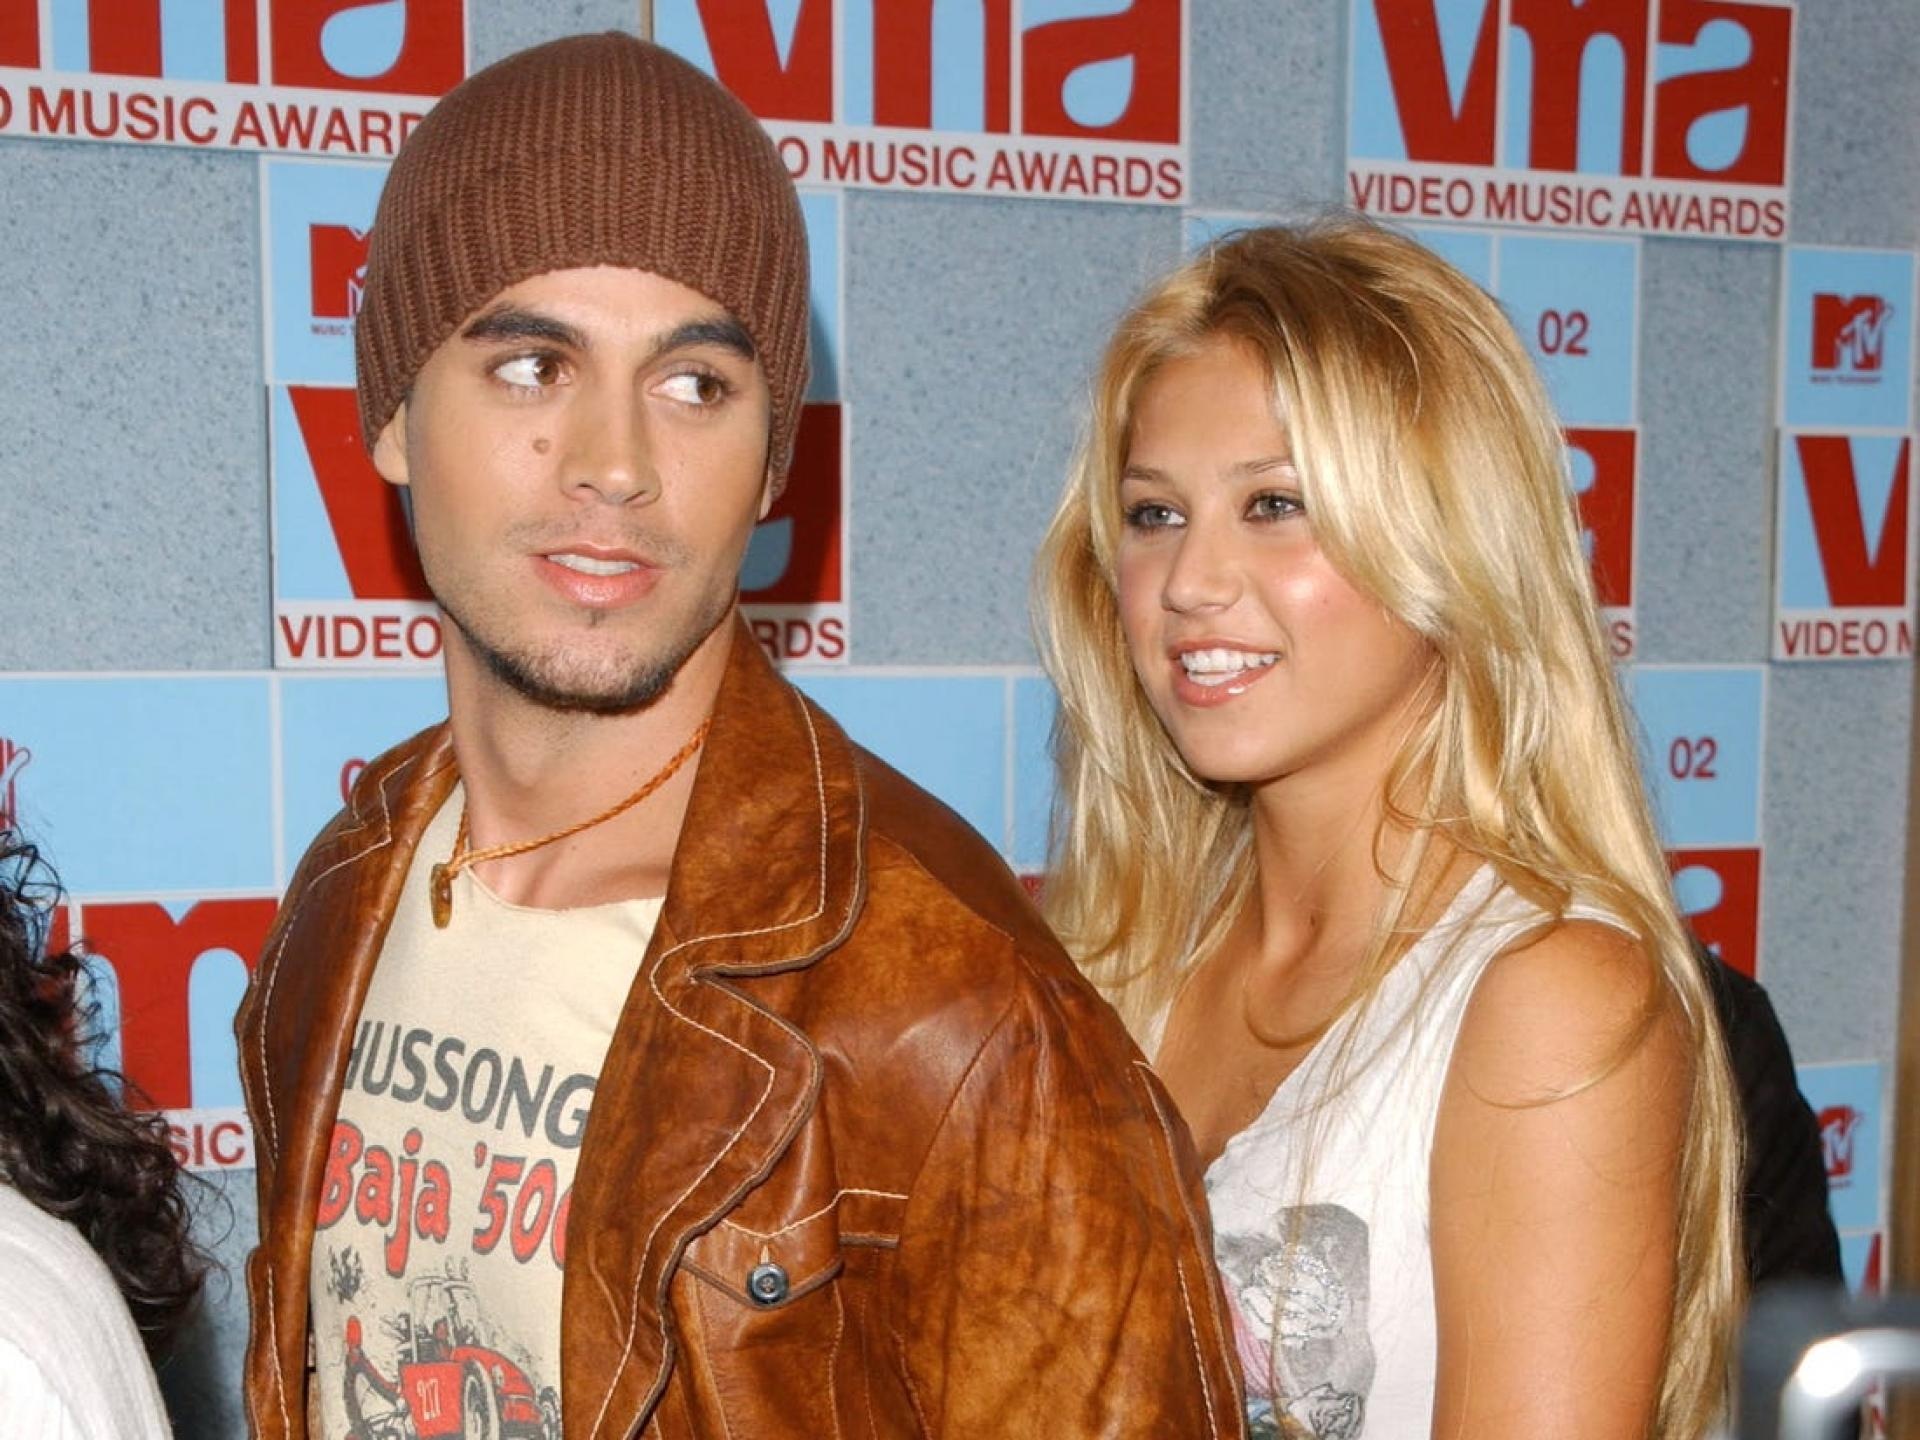 Enrique Iglesias and Anna Kournikova: Former tennis player, ranked no. 8 in the world in 2000, according to the Women's Tennis Association, Singer. 1920x1440 HD Wallpaper.